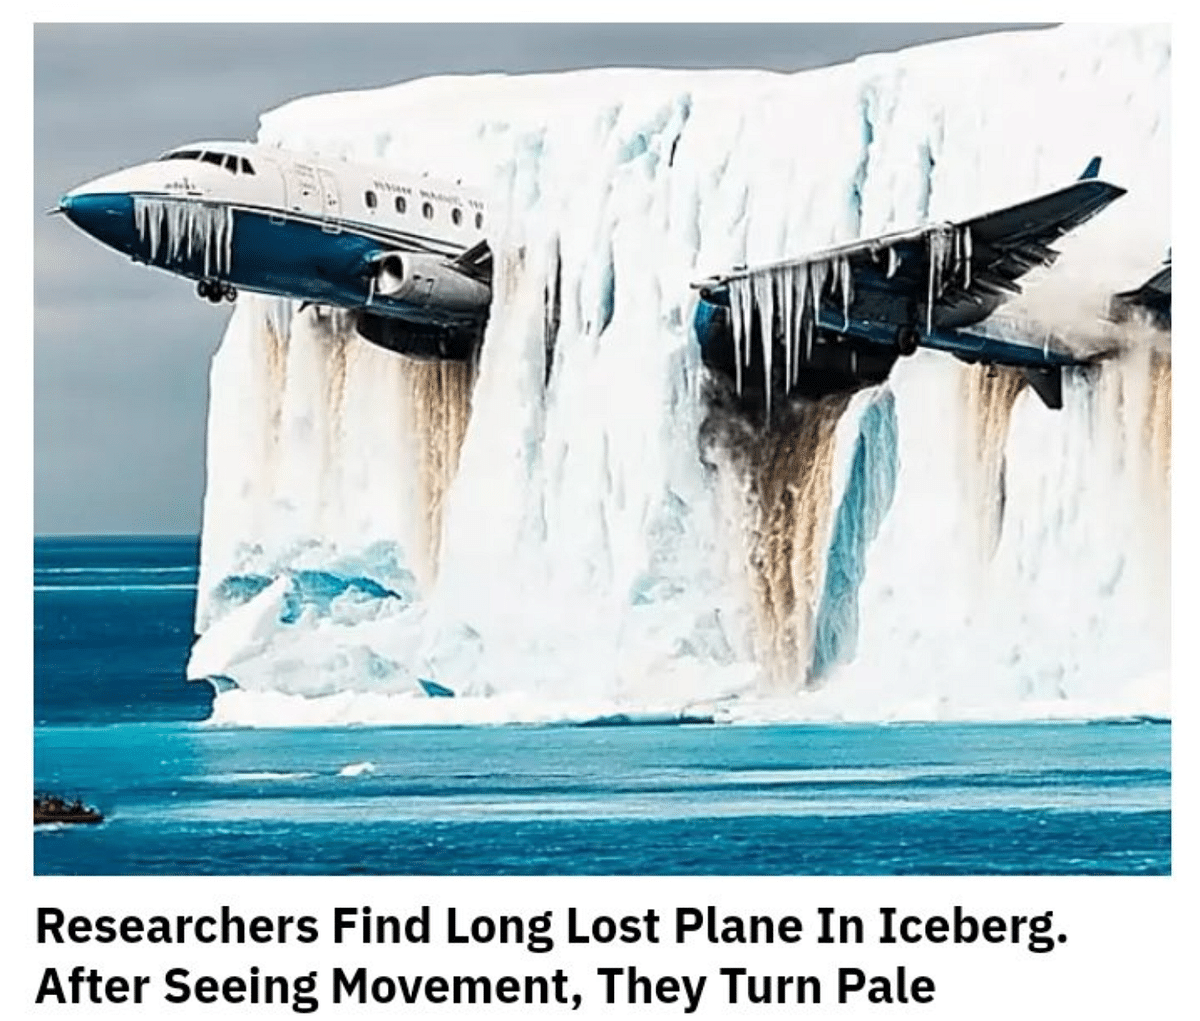 There is no trace of any evidence which supports the story of one Dr Landon's team discovering a missing plane.